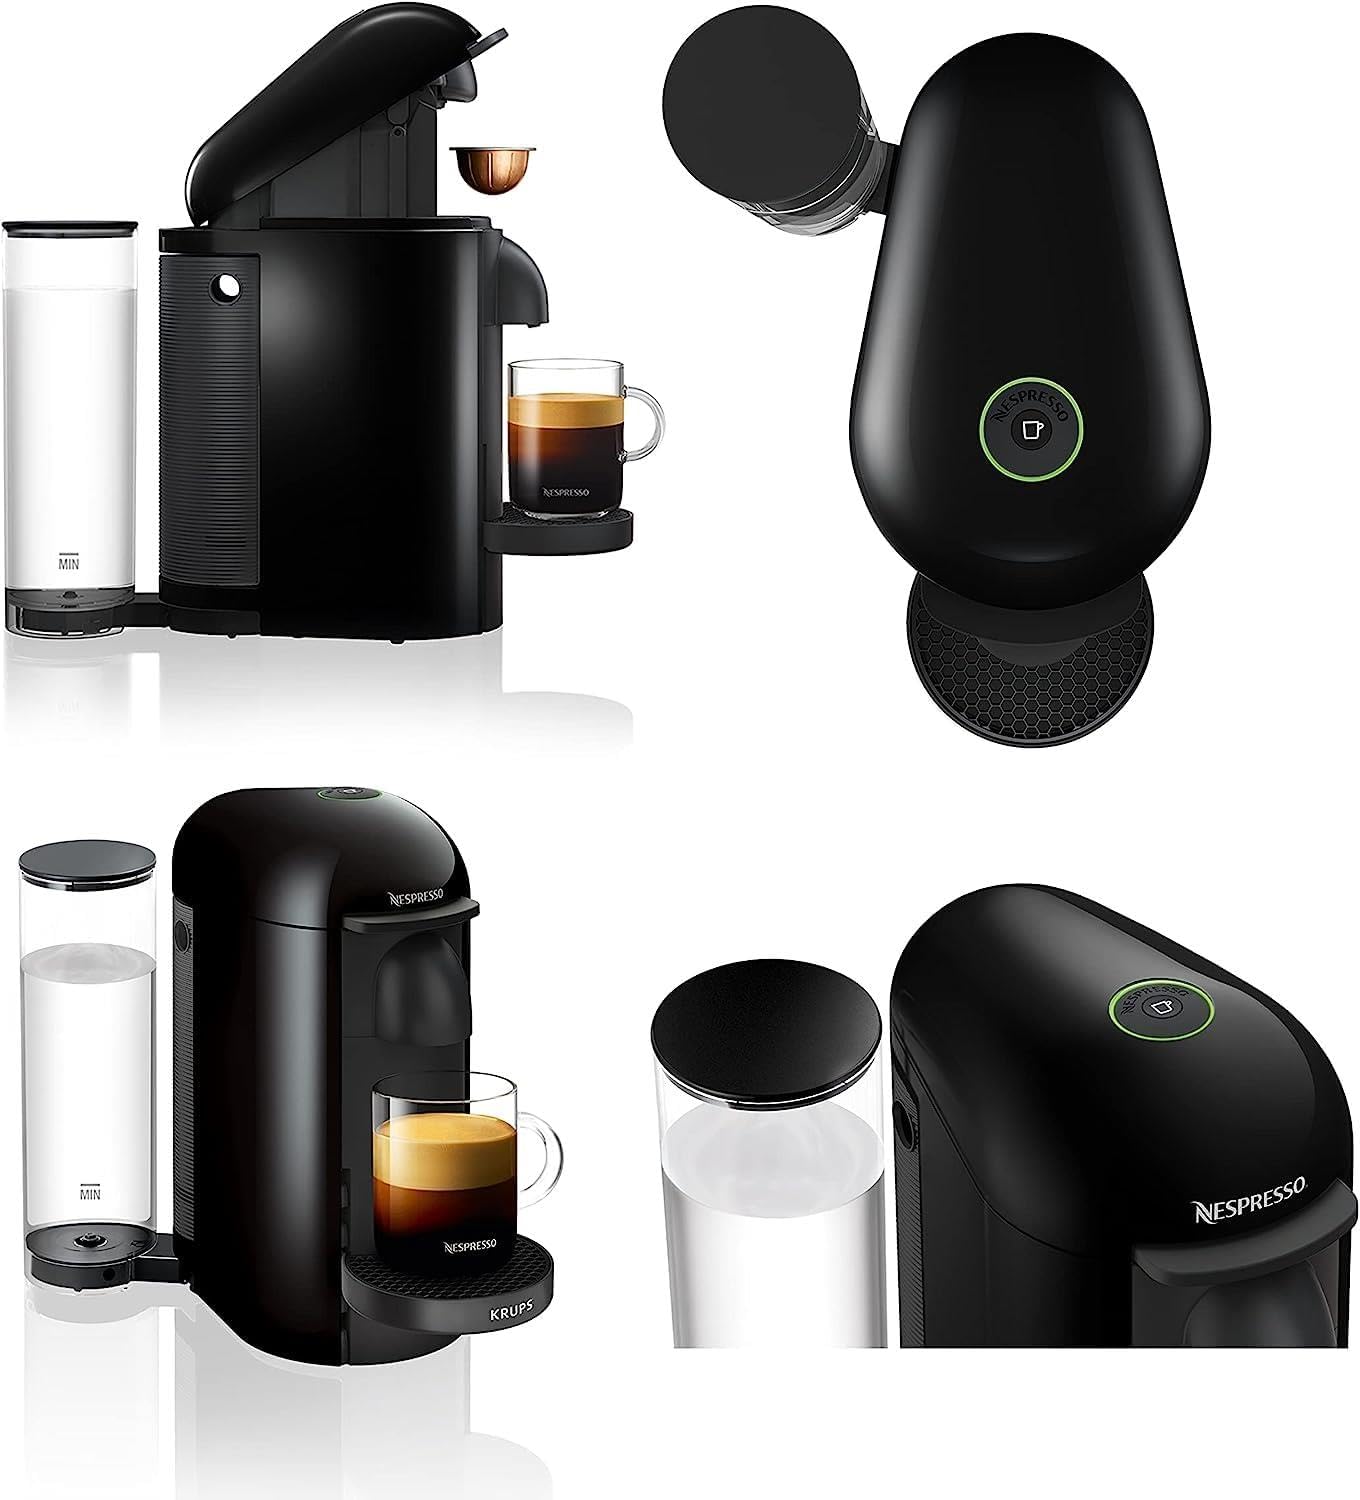 Nespresso Vertuo Plus Automatic Pod Coffee Machine for Americano, Decaf, Espresso by Krups in Black - Amazing Gadgets Outlet